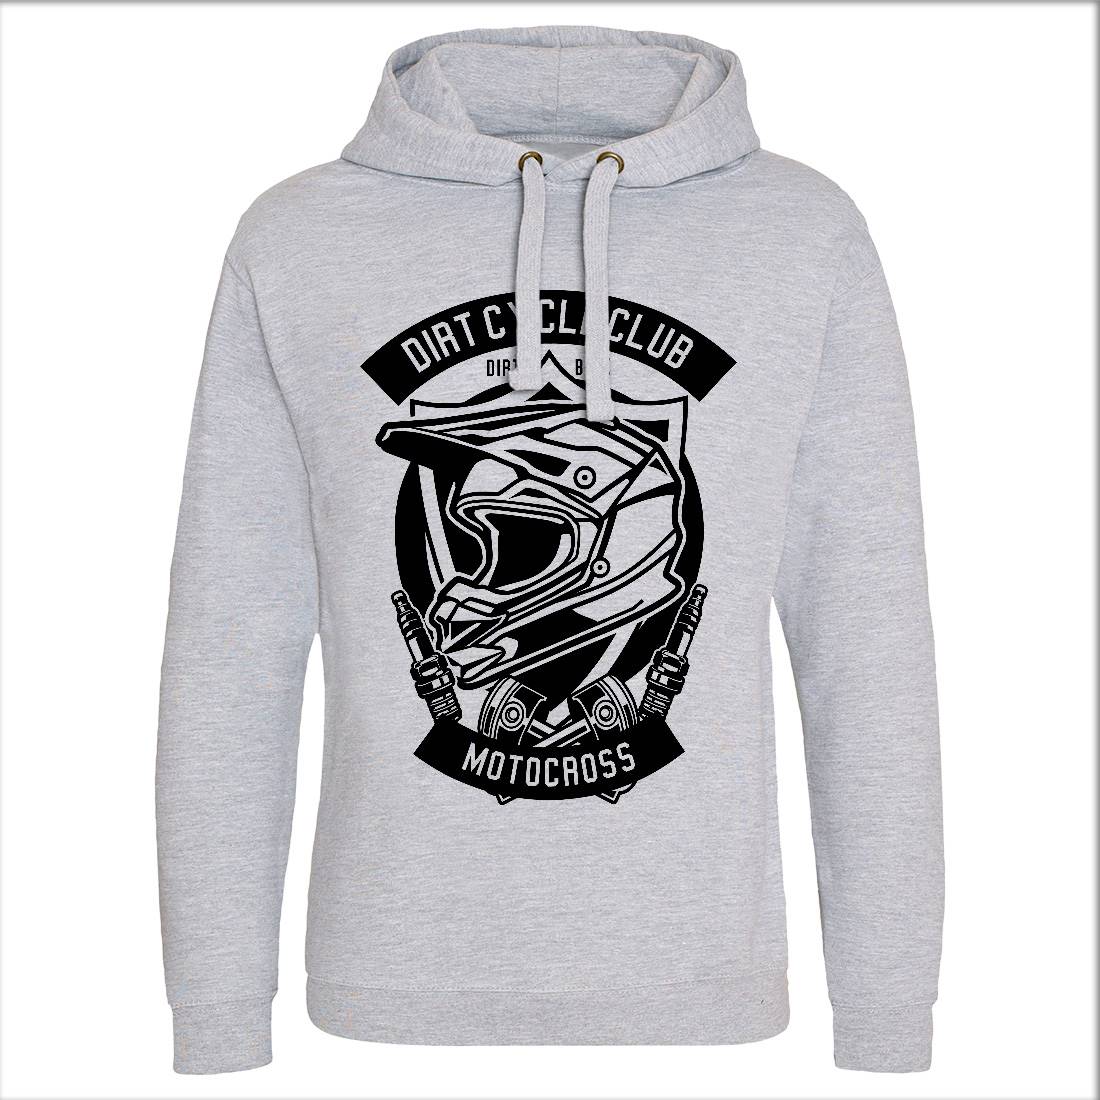 Dirty Cycle Club Mens Hoodie Without Pocket Motorcycles B532